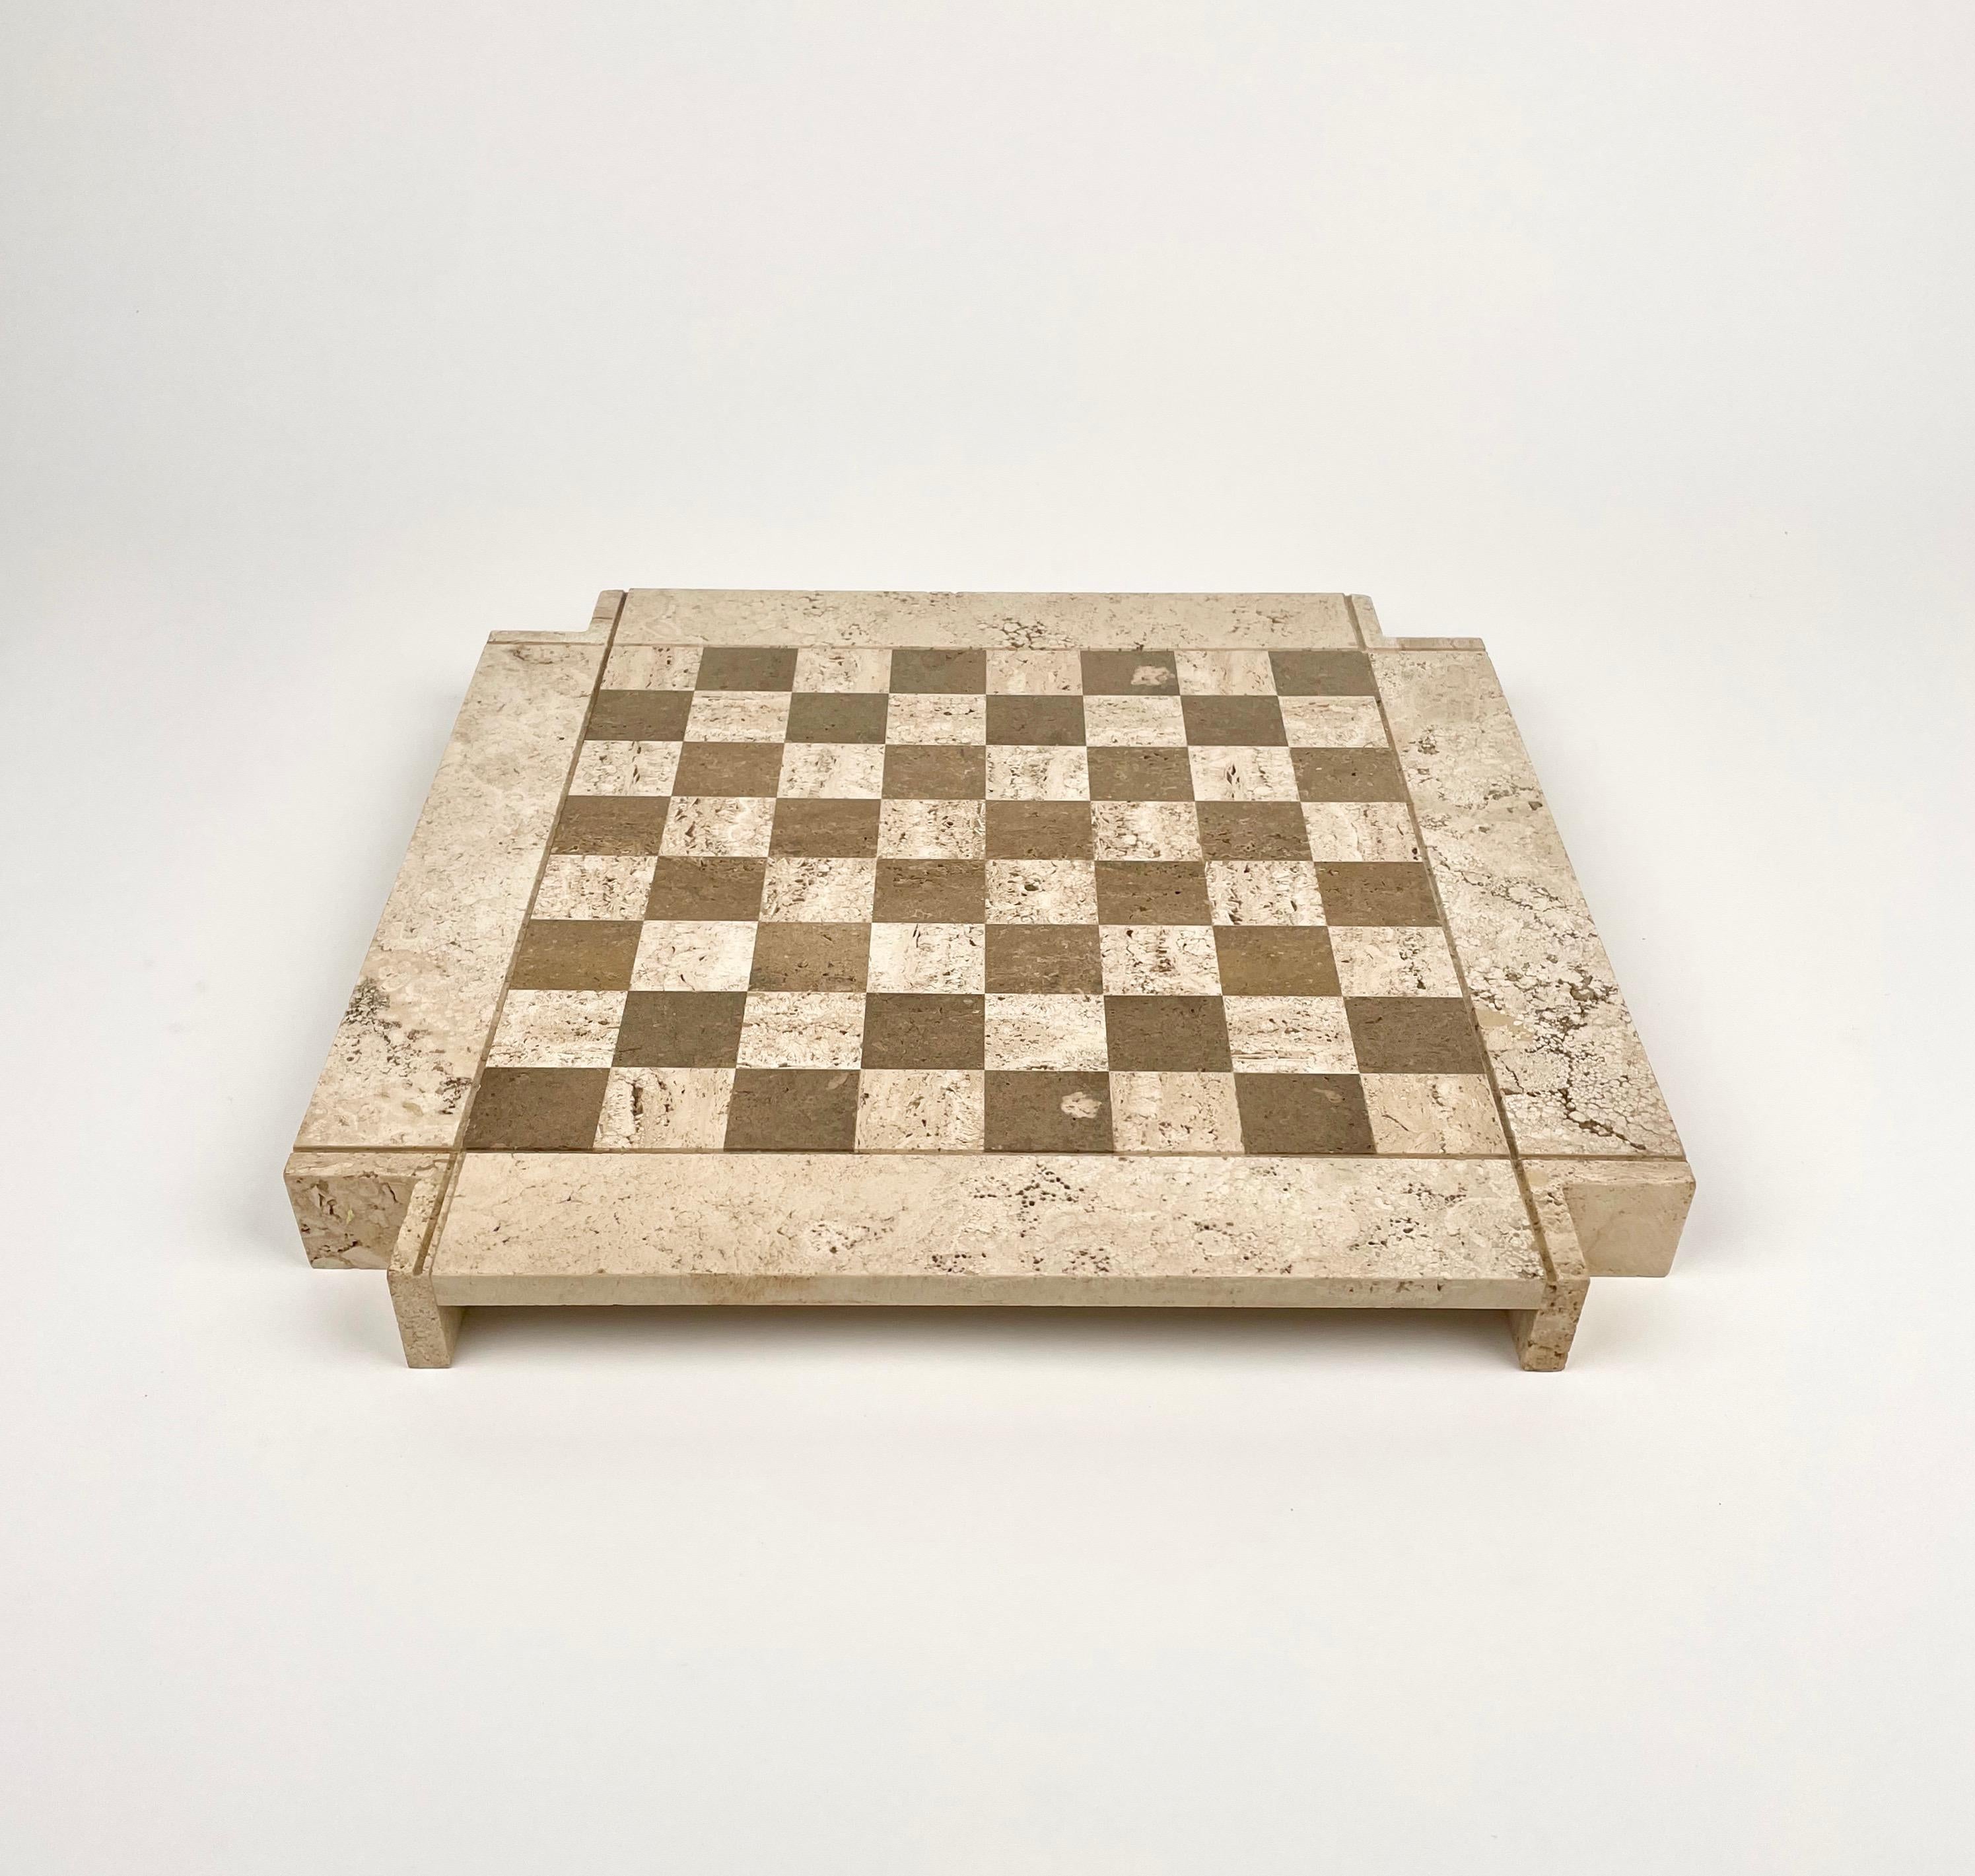 Rare modernist chess game in two colored travertine in the style of Italian design Angelo Mangiarotti.

Made in Italy in the 1970s.

The minimalistic design of this game set will make a fine table top accessory in any room.